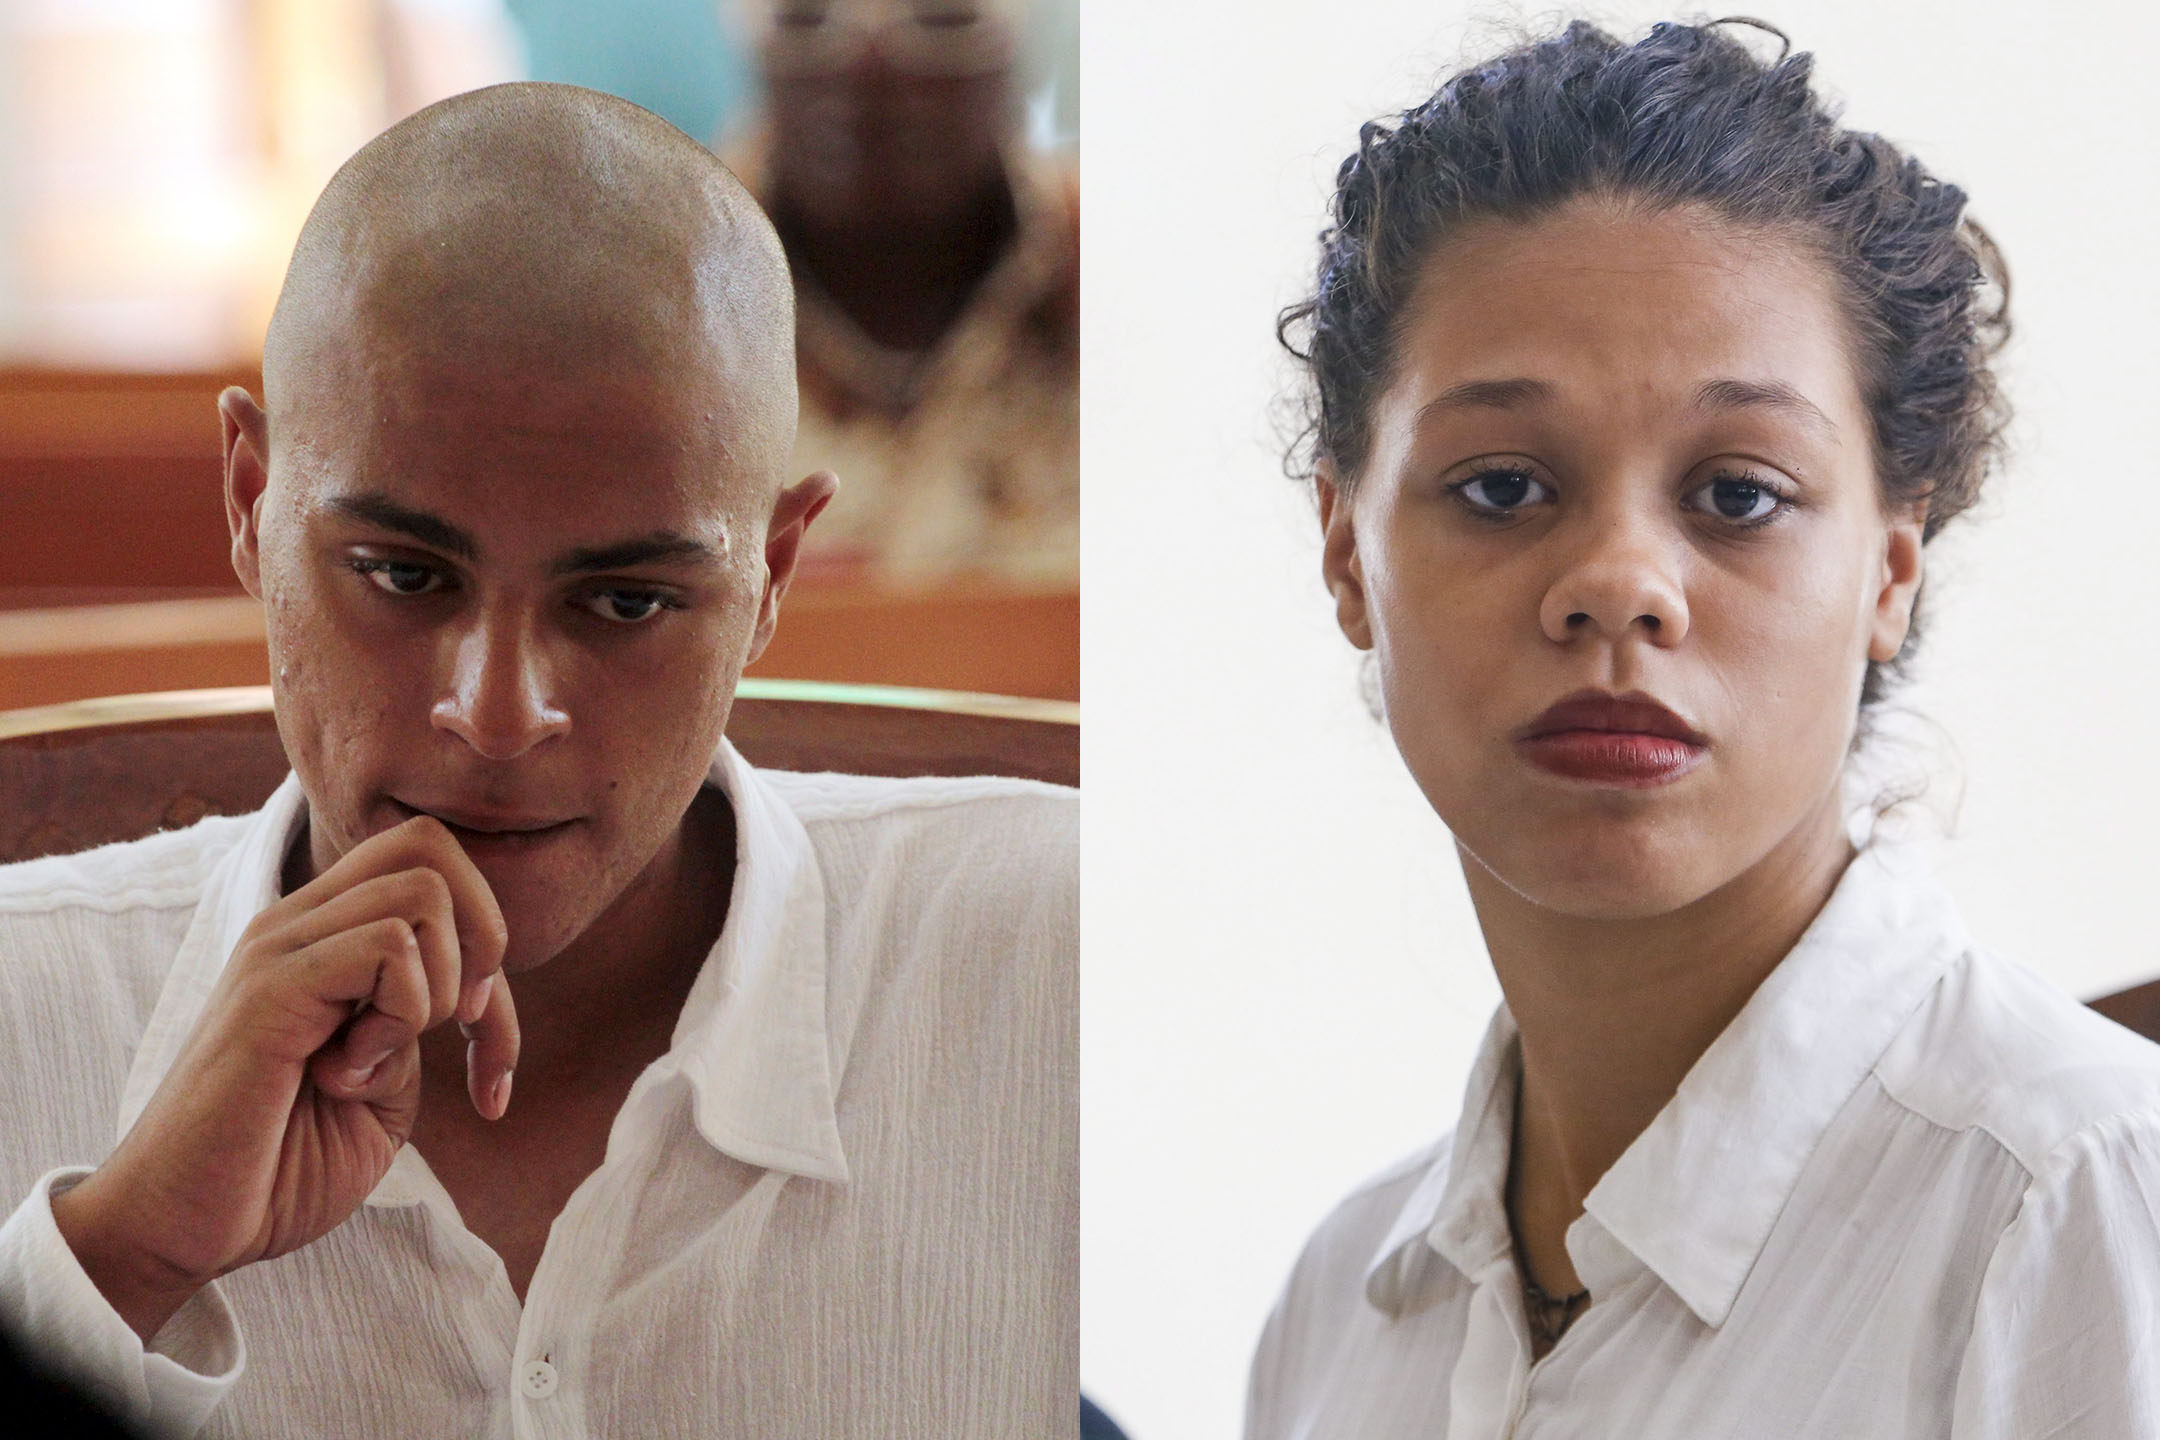 Tommy Schaefer and Heather Louis Mack in a courtroom during their first hearing trials in Denpasar, Bali, Indonesia on Jan. 14, 2015.